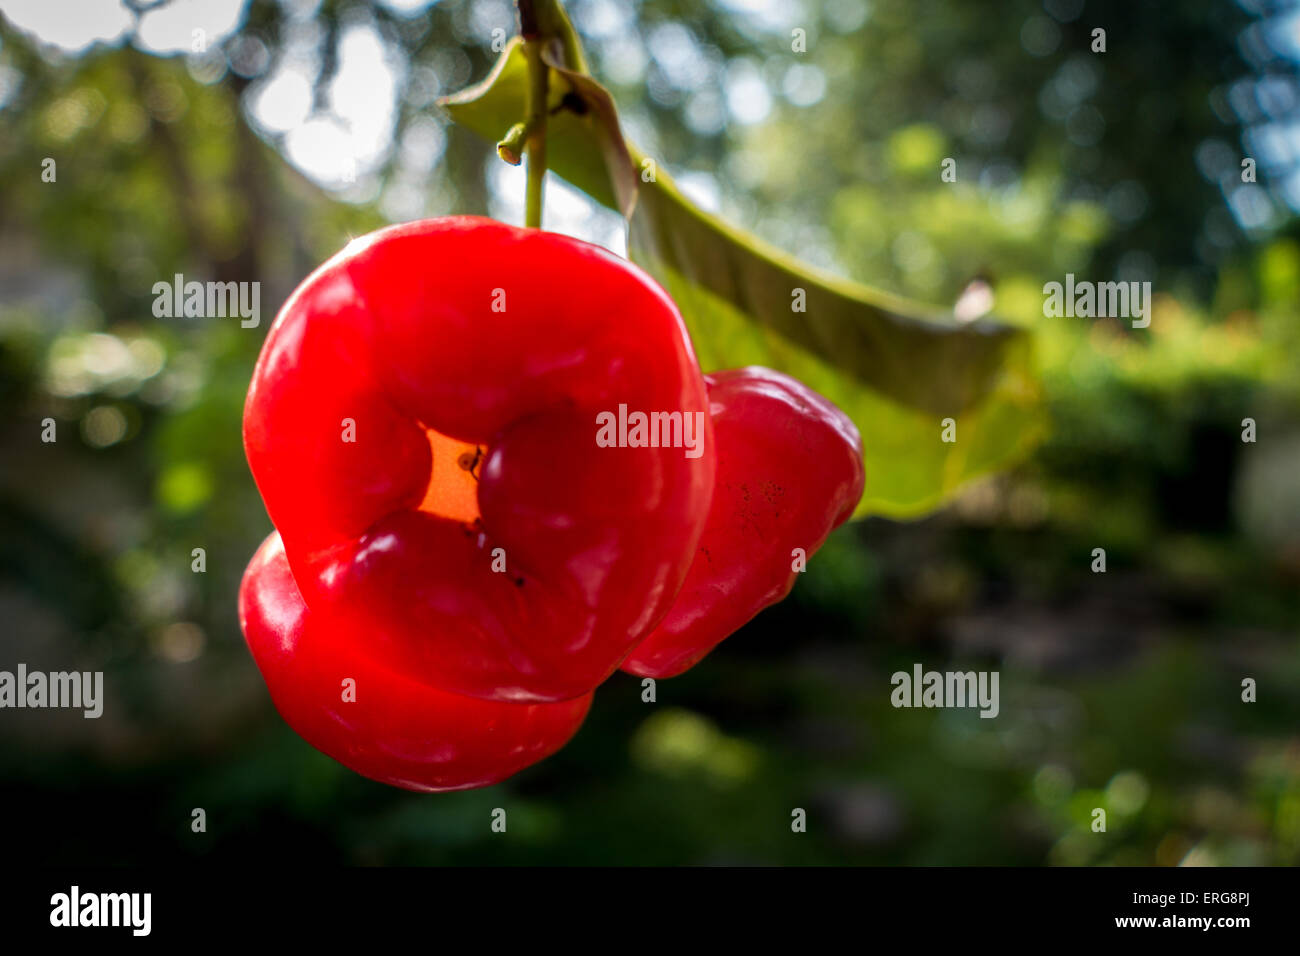 Rose apple fruit hanging in the three Stock Photo